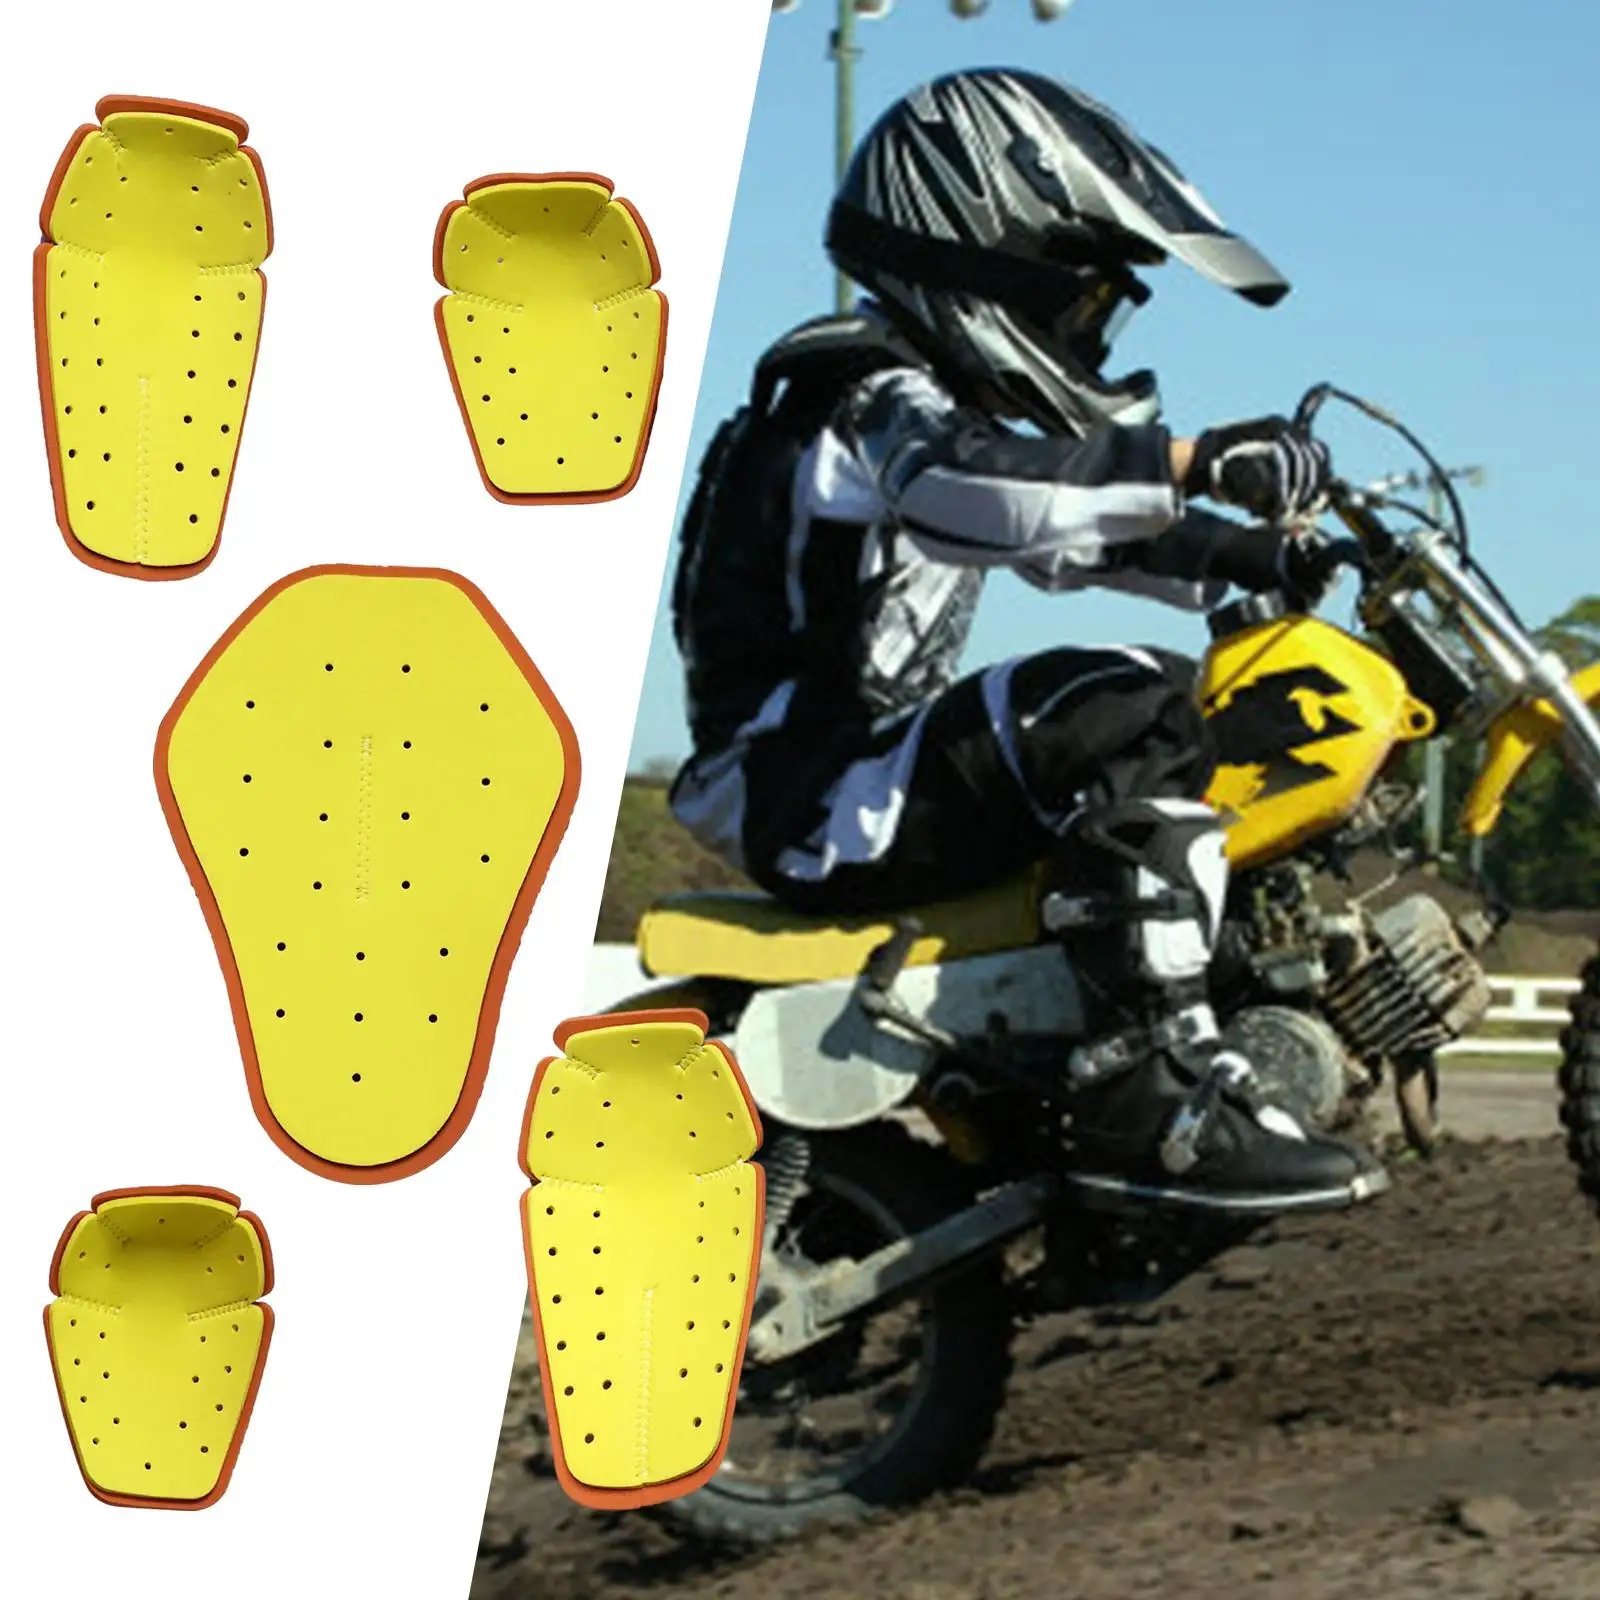 5Pieces Motorbike Protection Pad Insert Protector Set for Biker Motorcycle